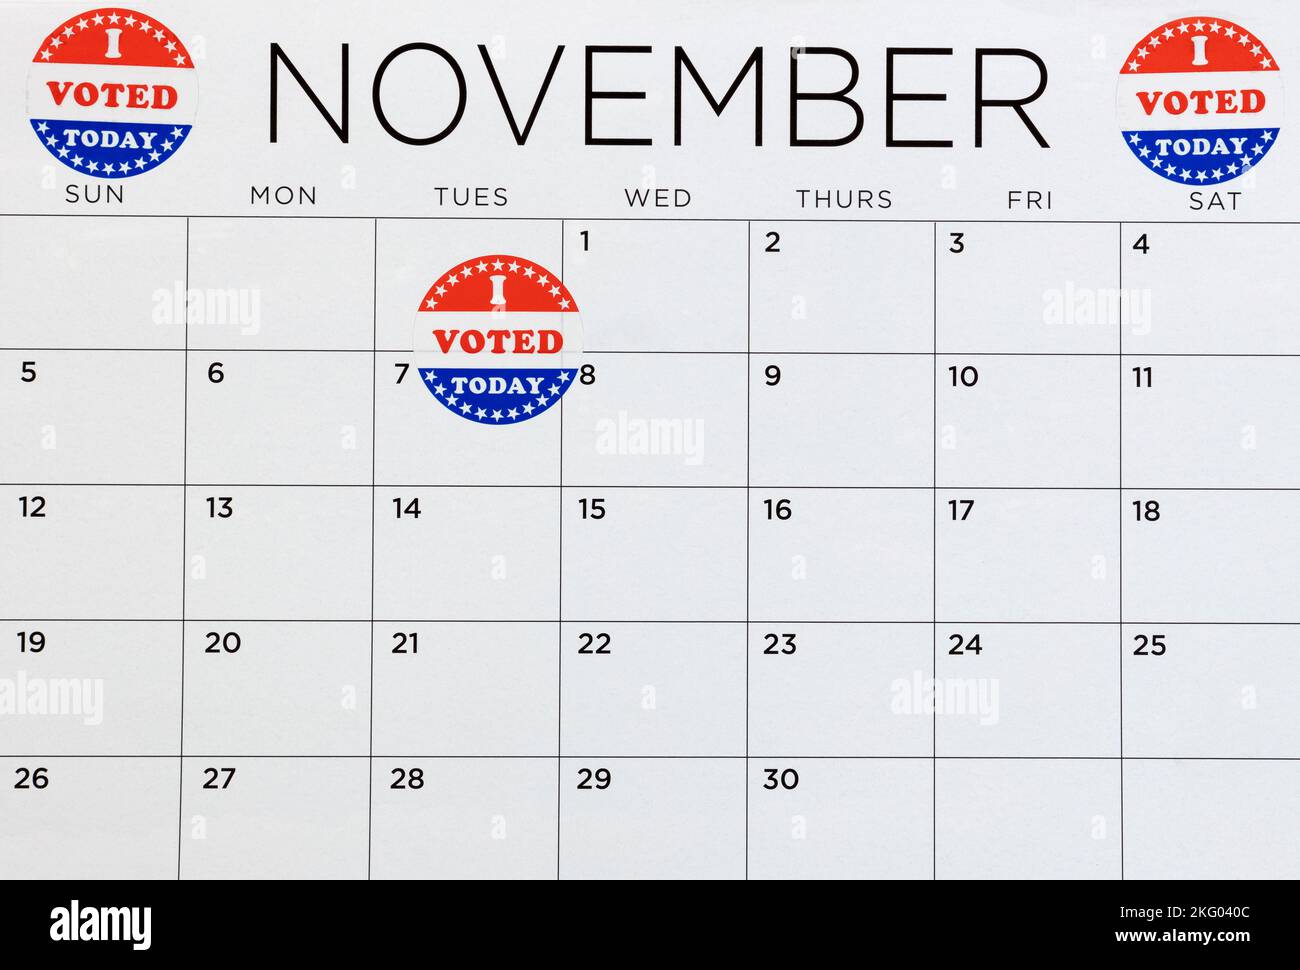 Vote stickers on November calendar background for American election campaign concept Stock Photo